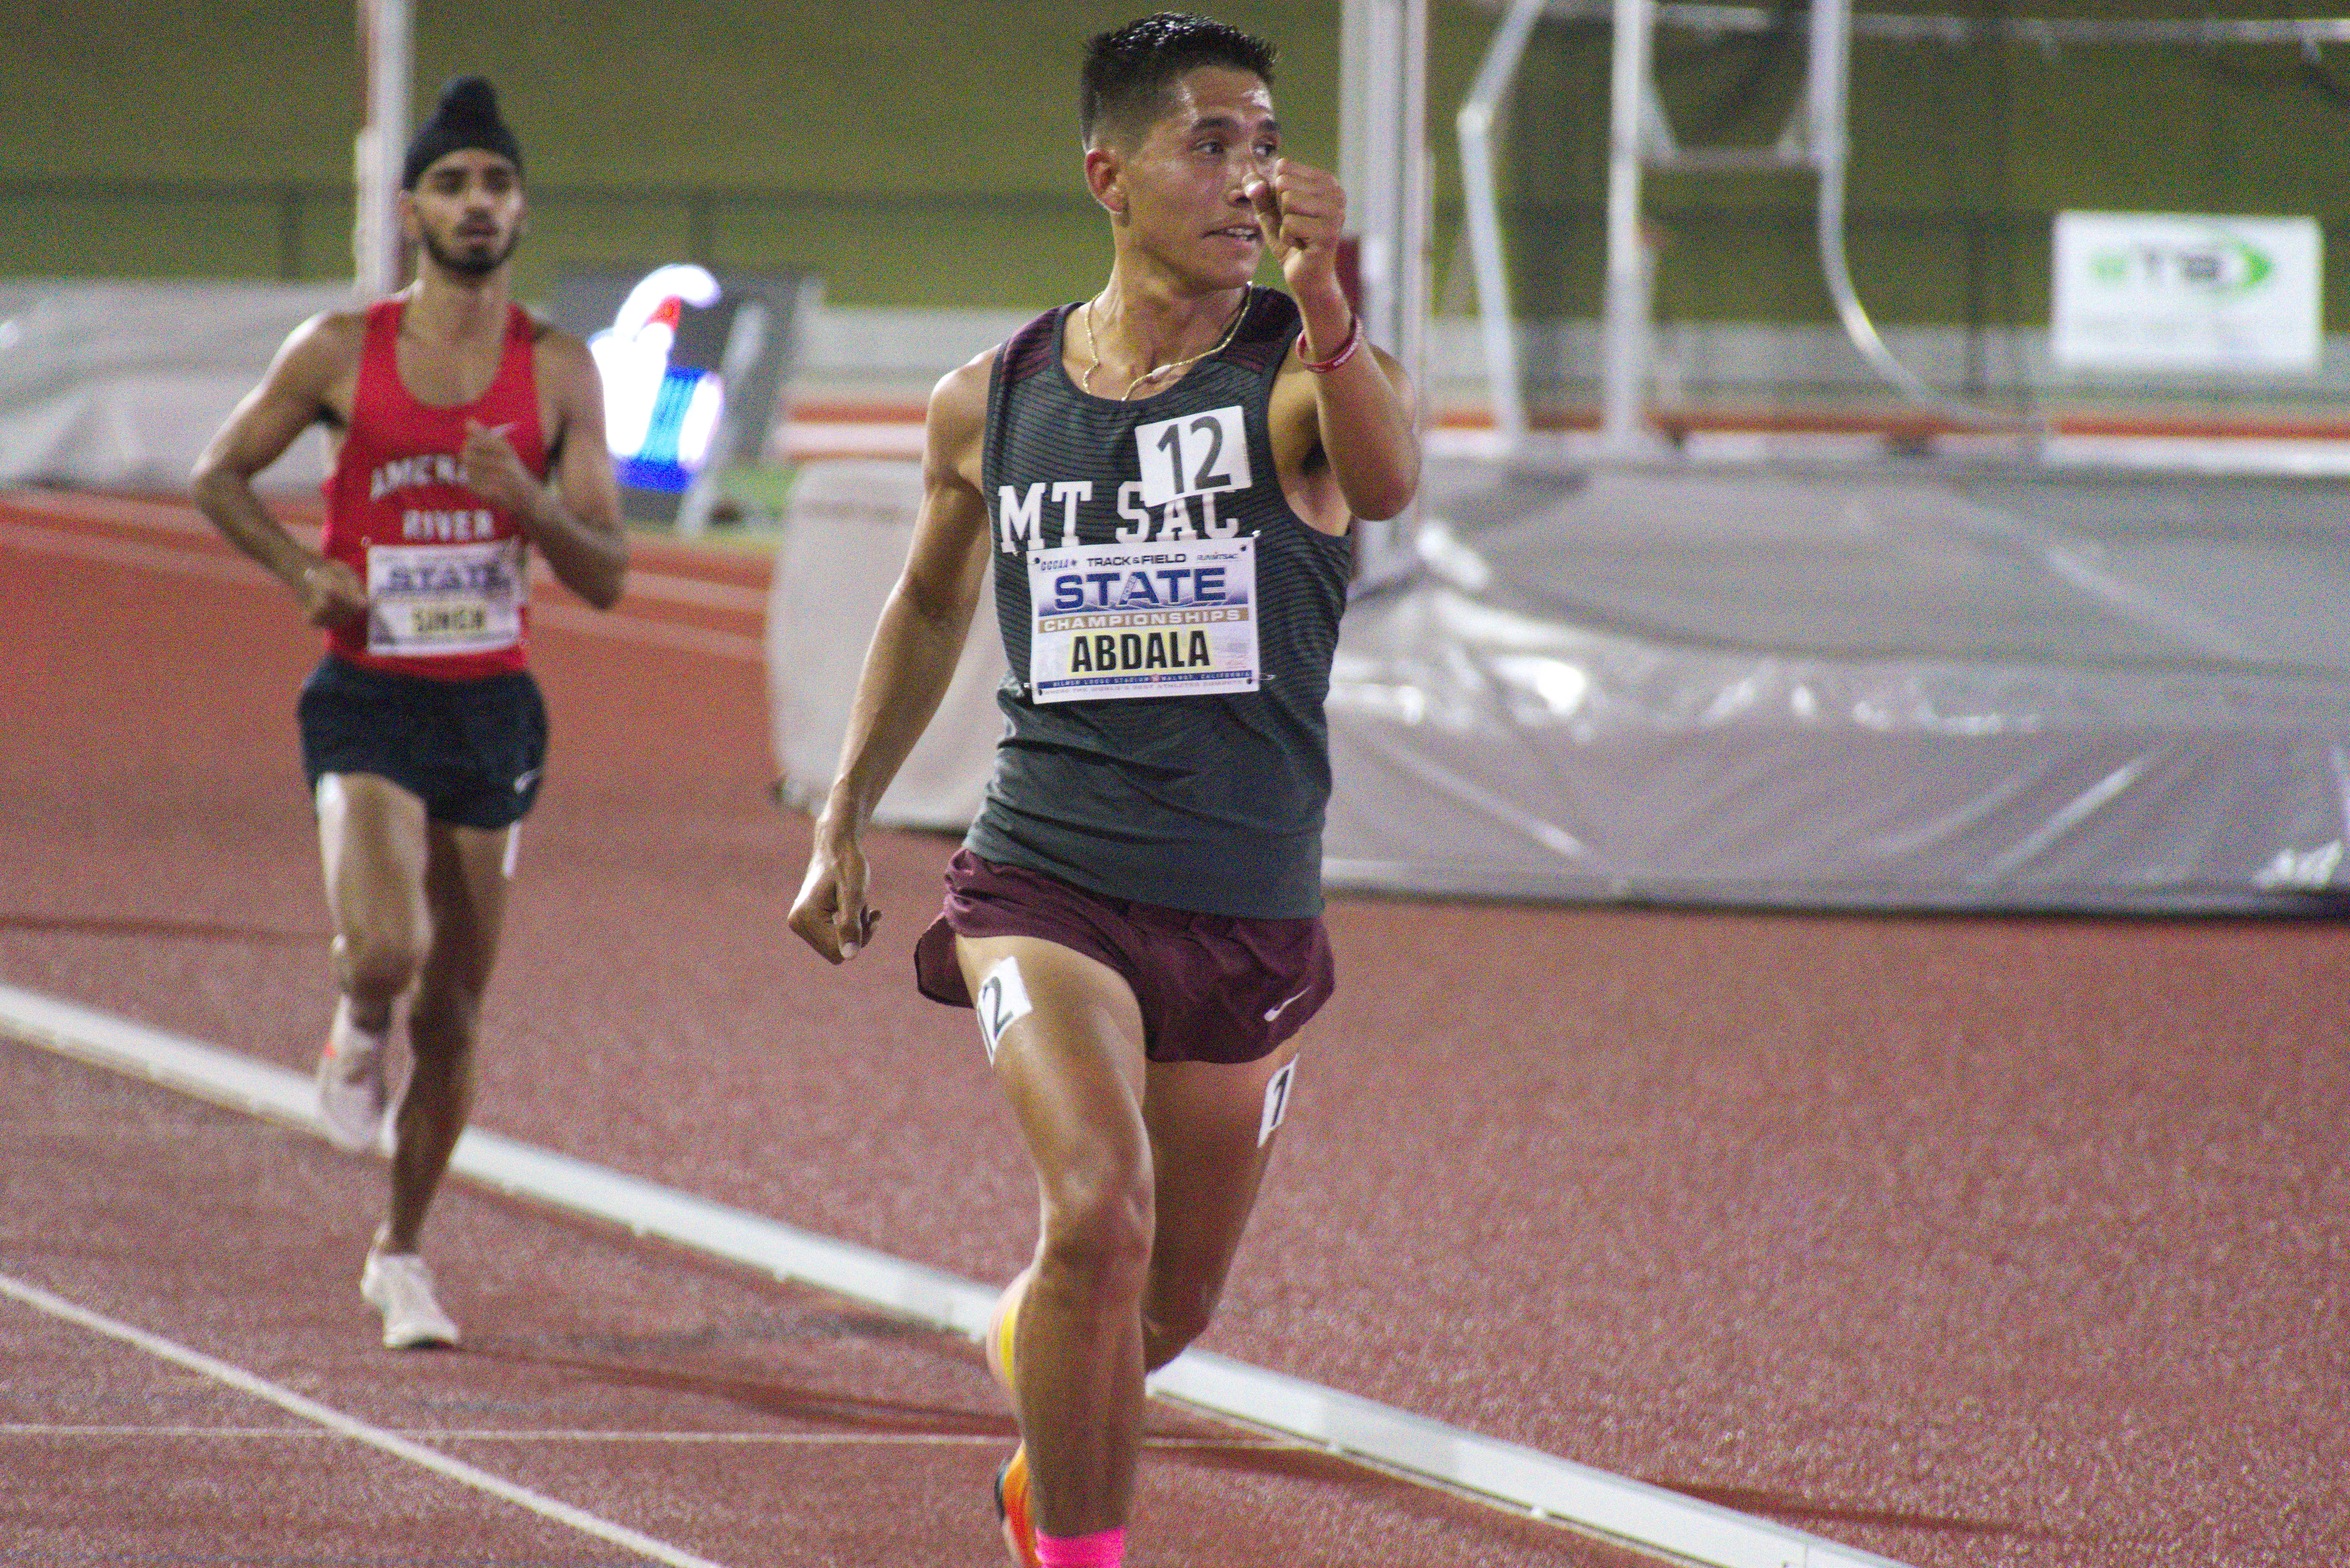 Daniel Abdala won two events in helping Mt. SAC win the 2022 state championship (photo by Ken McLin).